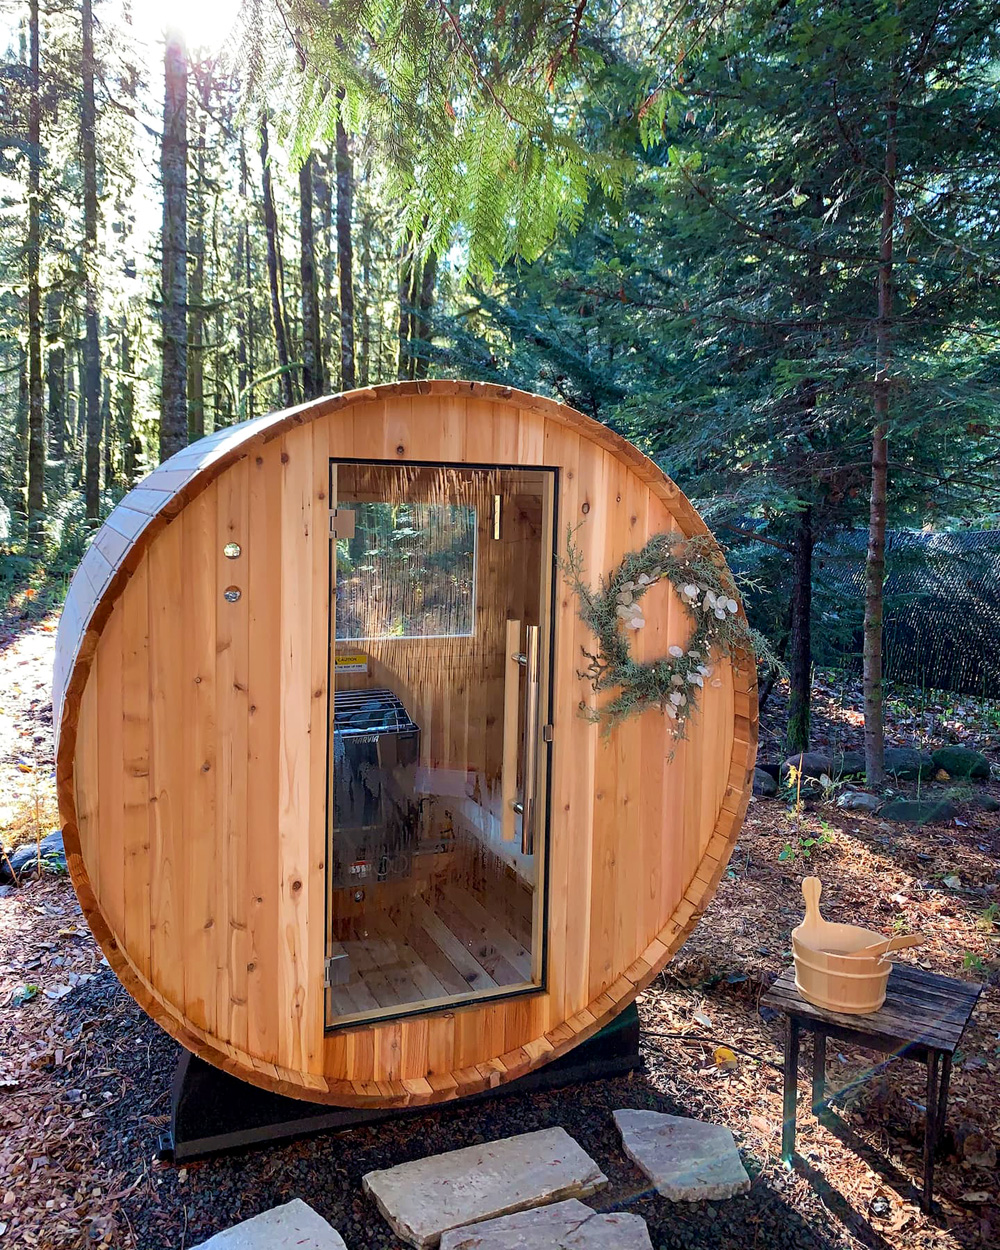 30 Dreamy Oregon Cabins You Can Rent - Renee Roaming